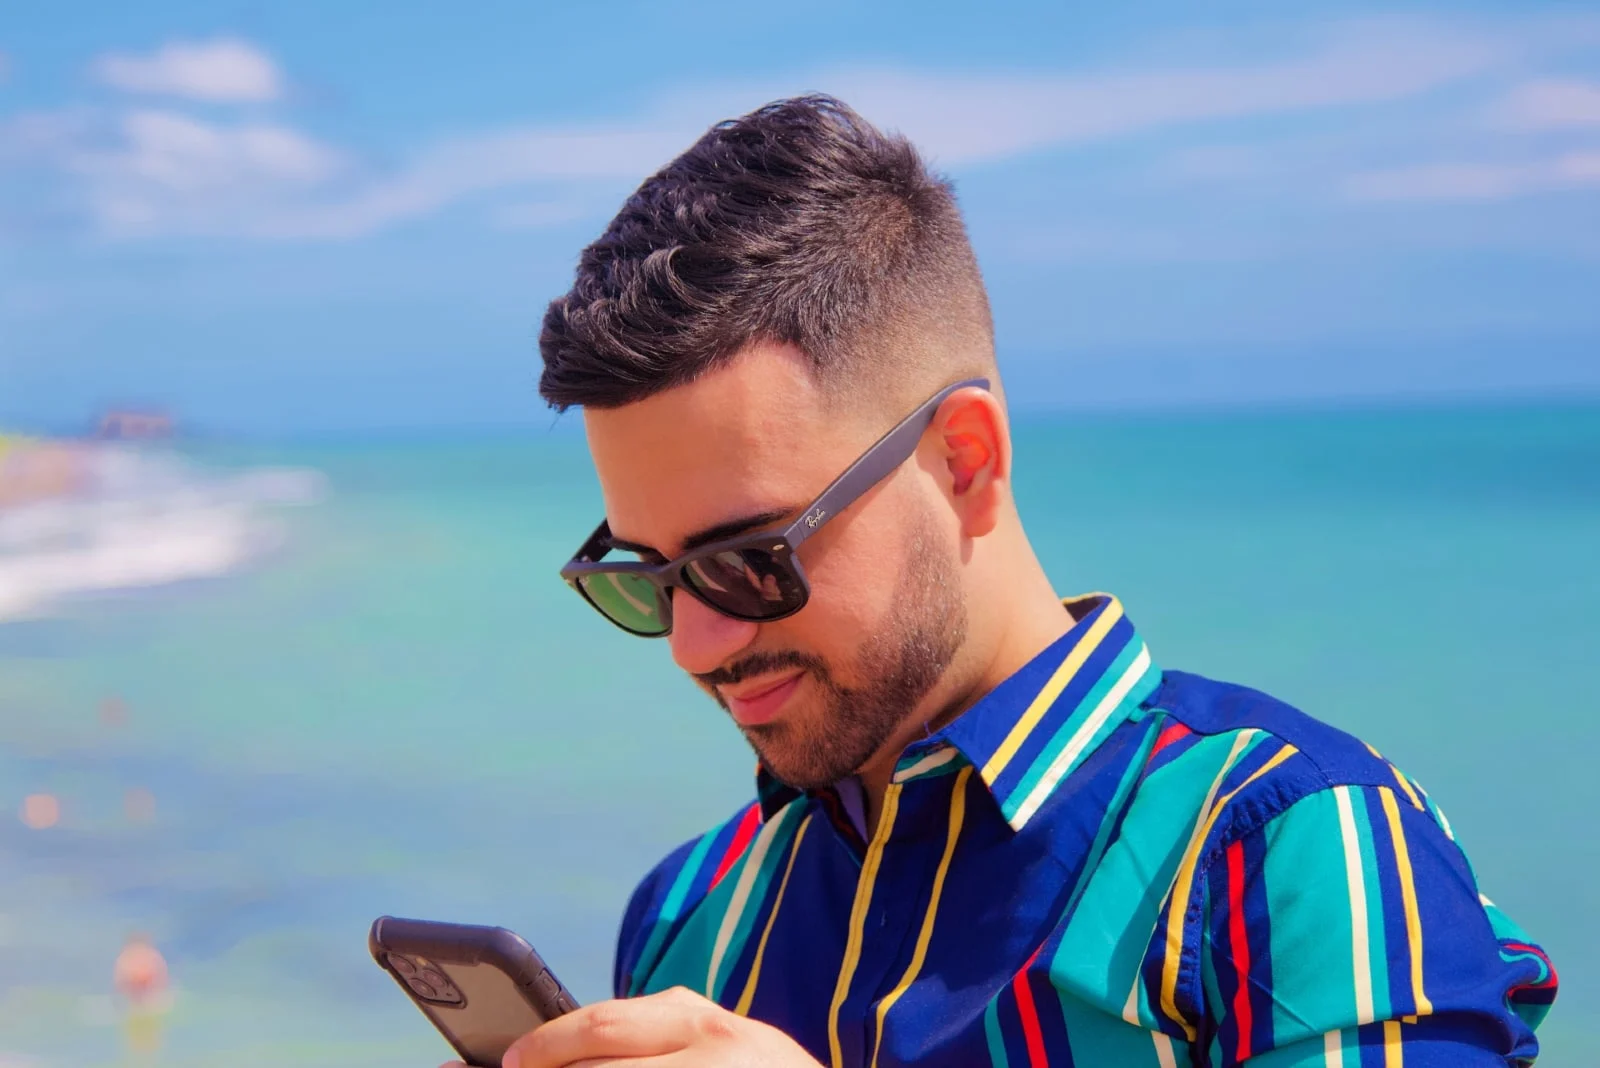 man with sunglasses looking at phone while standing outdoor